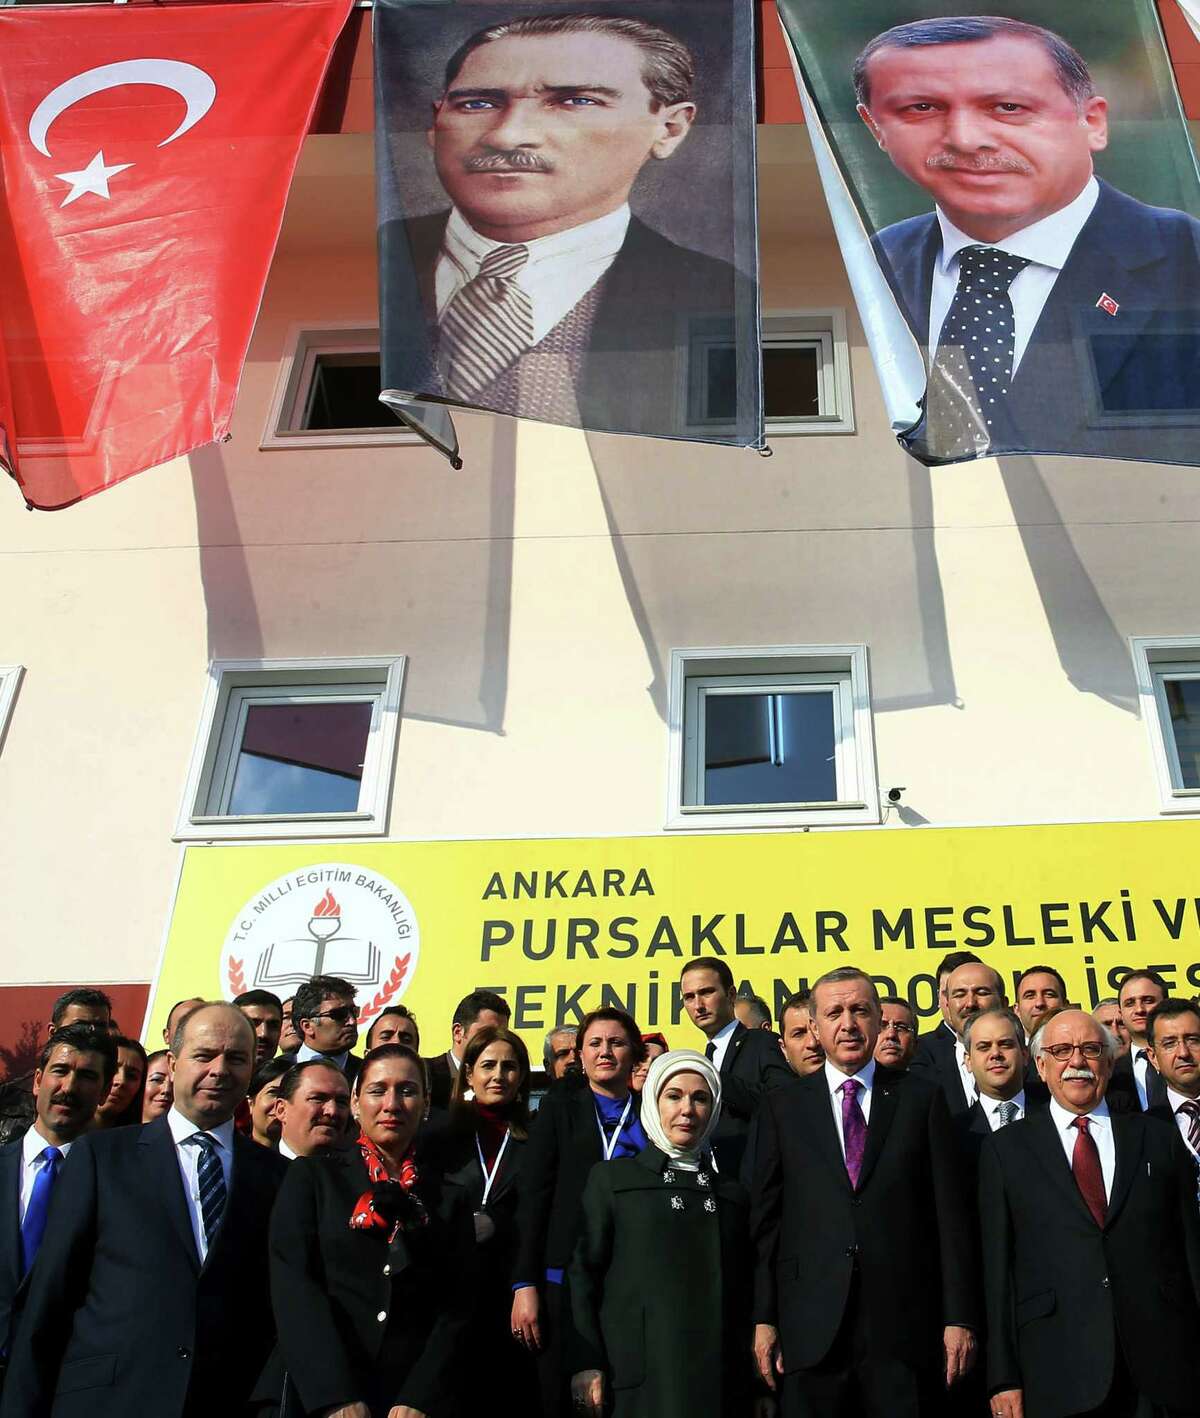 FILE - In this Nov. 18, 2014 file photo, Turkish President Recep Tayyip Erdogan, center-right, and his wife Emine Erdogan pose for photos with officials in the courtyard of a Vocational School for Girls under a poster of Mustafa Kemal Ataturk, center, outside Ankara, Turkey. Turkey has long enshrined the secular ideals of founding father Mustafa Kemal Ataturk, particularly in an education system in which Islamic headscarves were until recently banned in schools and schoolchildren began the day reciting an oath of allegiance to Ataturkís legacy. Now proponents of Turkeyís secular traditions claim President Recep Tayyip Erdogan is overturning those traditions by building a more Islam-focused education system to realize his stated goal of raising ìpious generations.î (AP Photo/File)